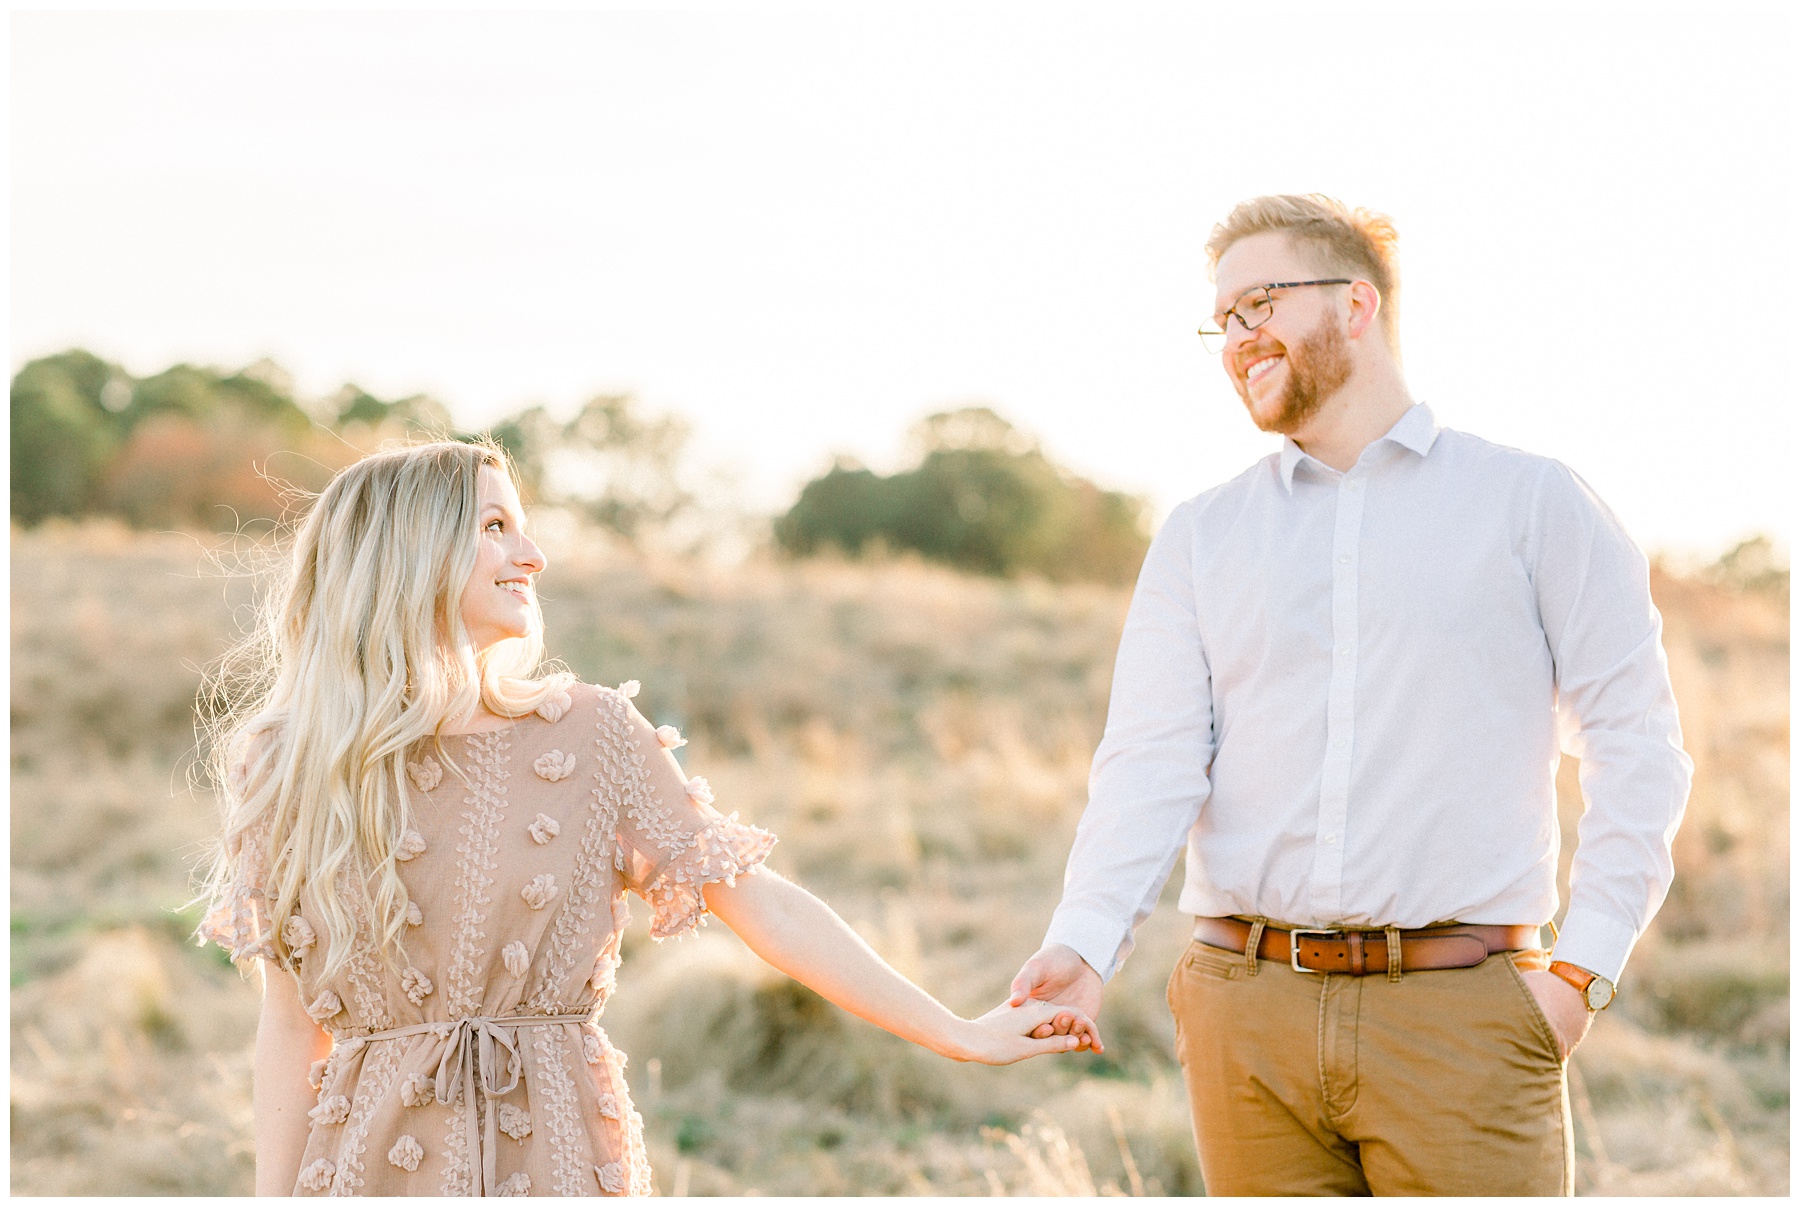 North Carolina Museum of Art Spring Engagement Session in Raleigh North Carolina. Walking in Sun soaked fields at sunset